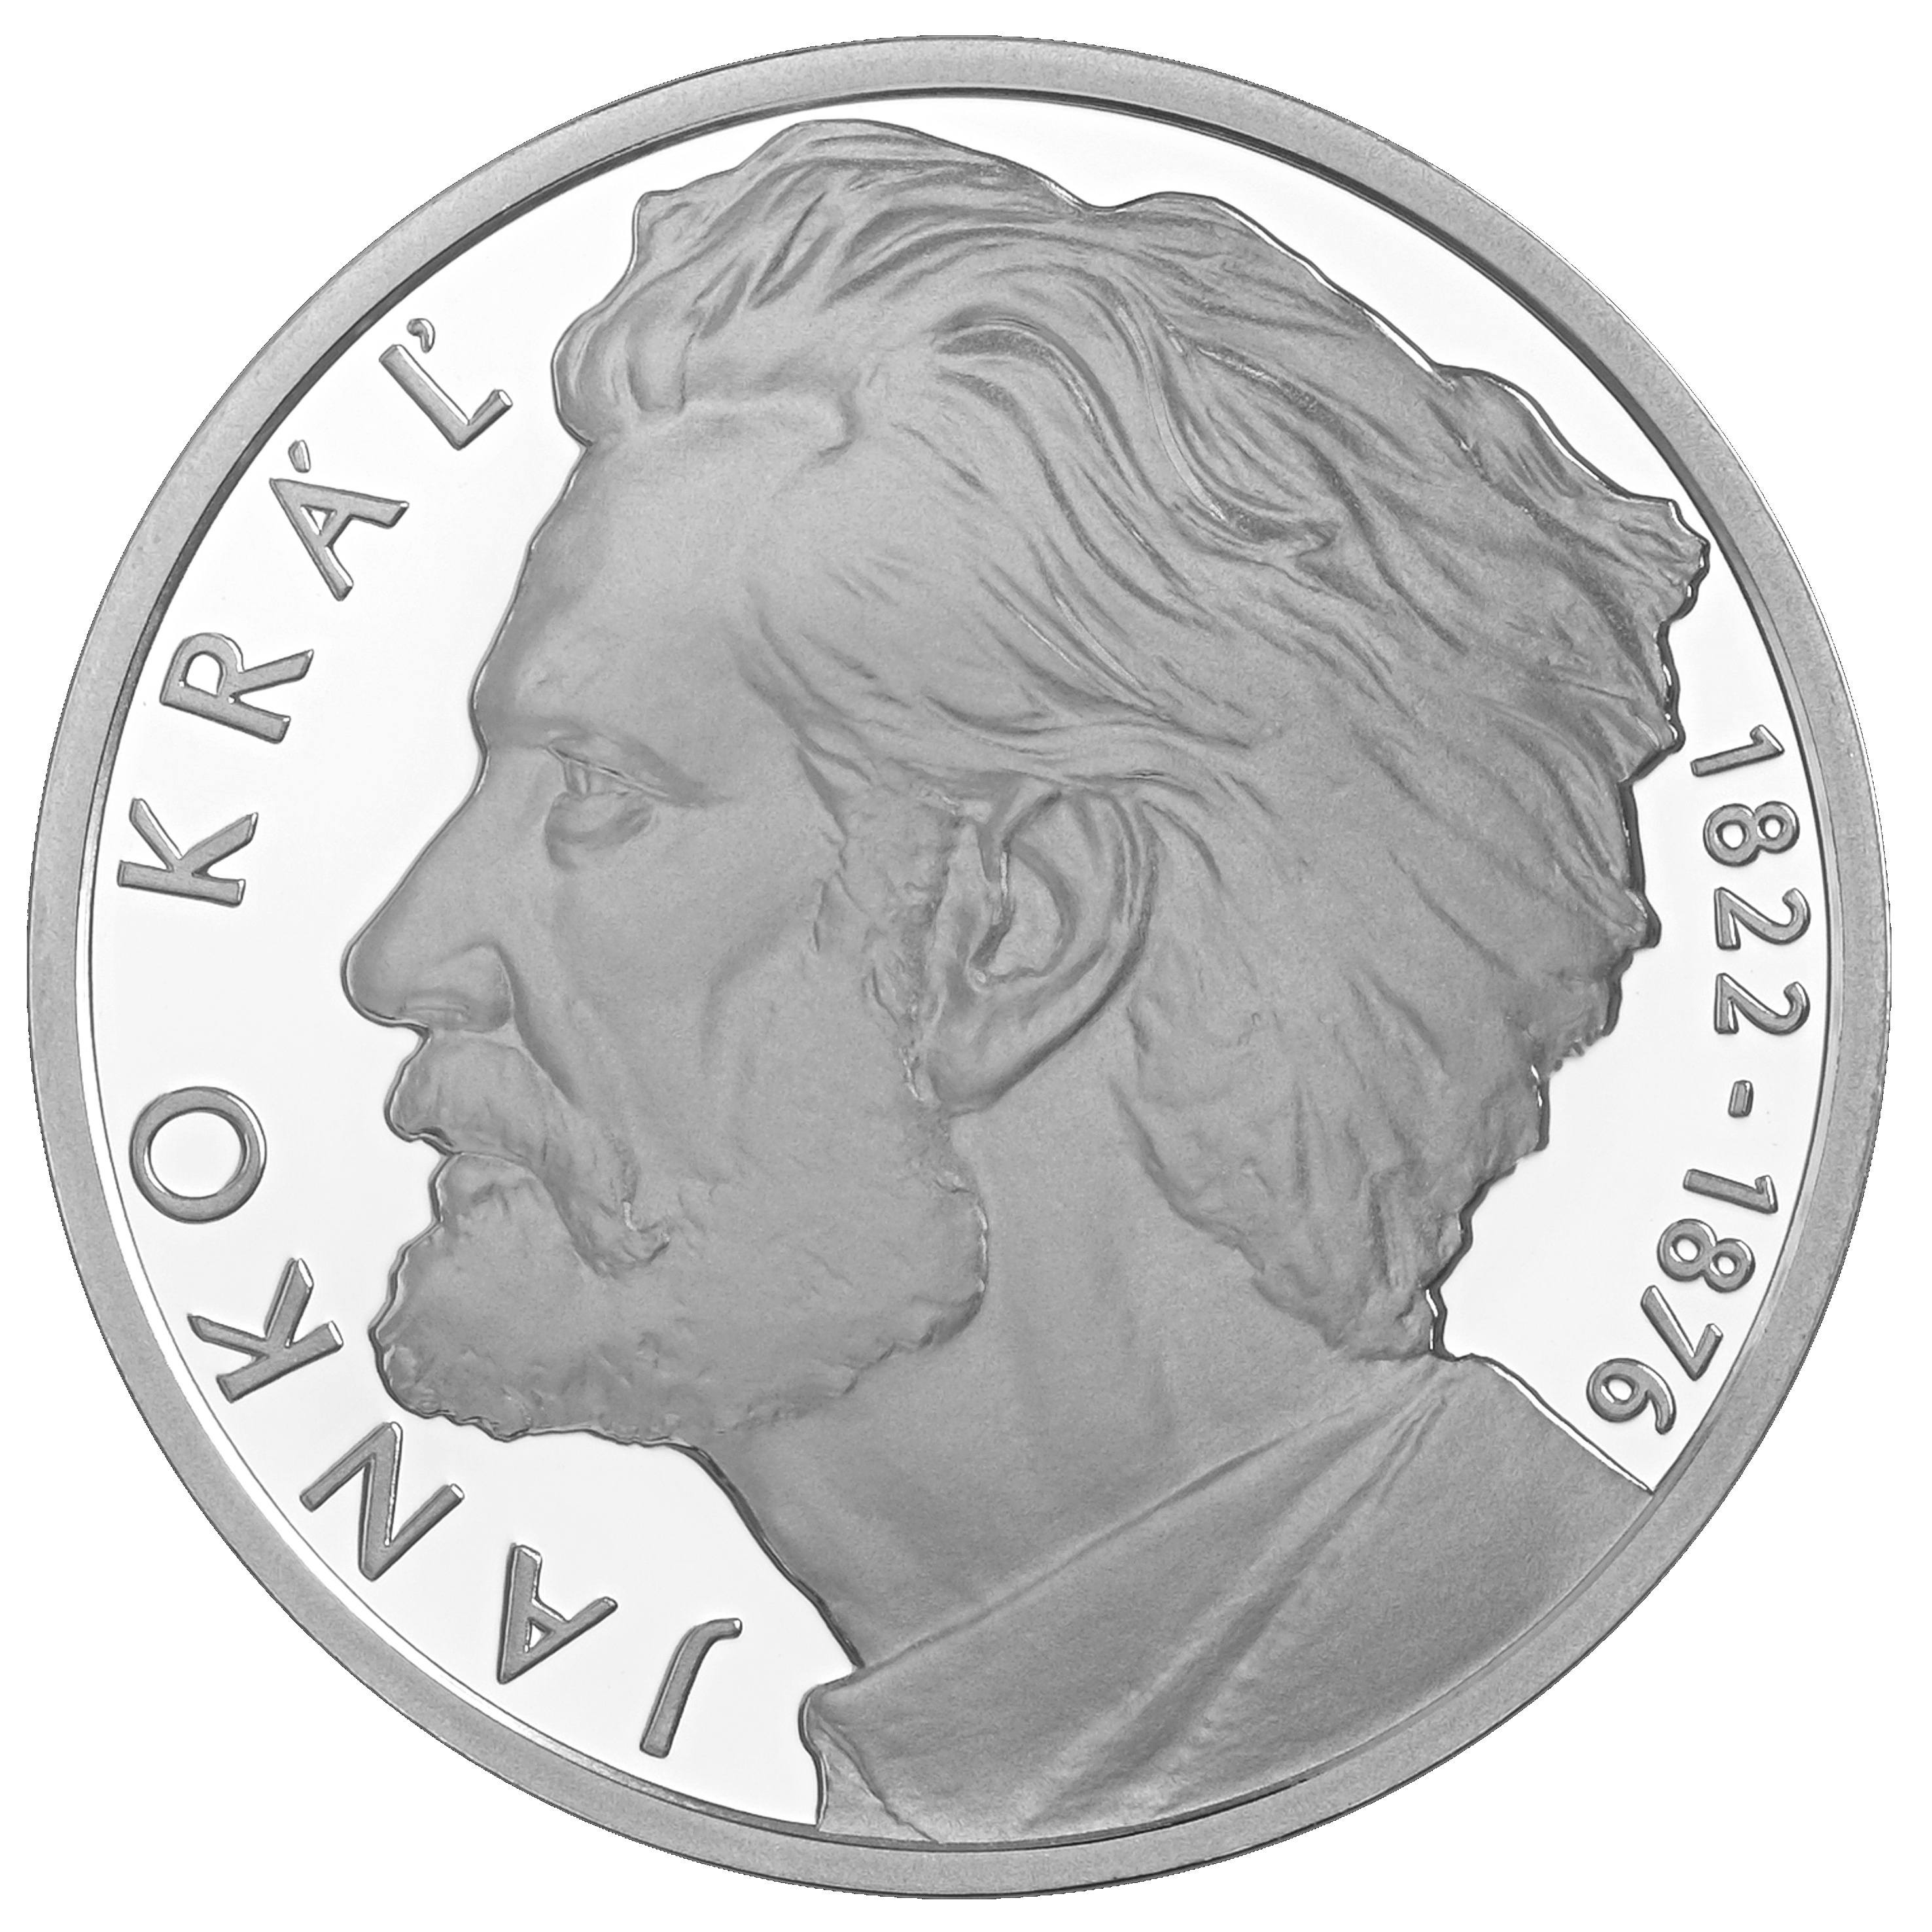 €10 silver collector euro coin 200th anniversary of the birth of Janko Kráľ